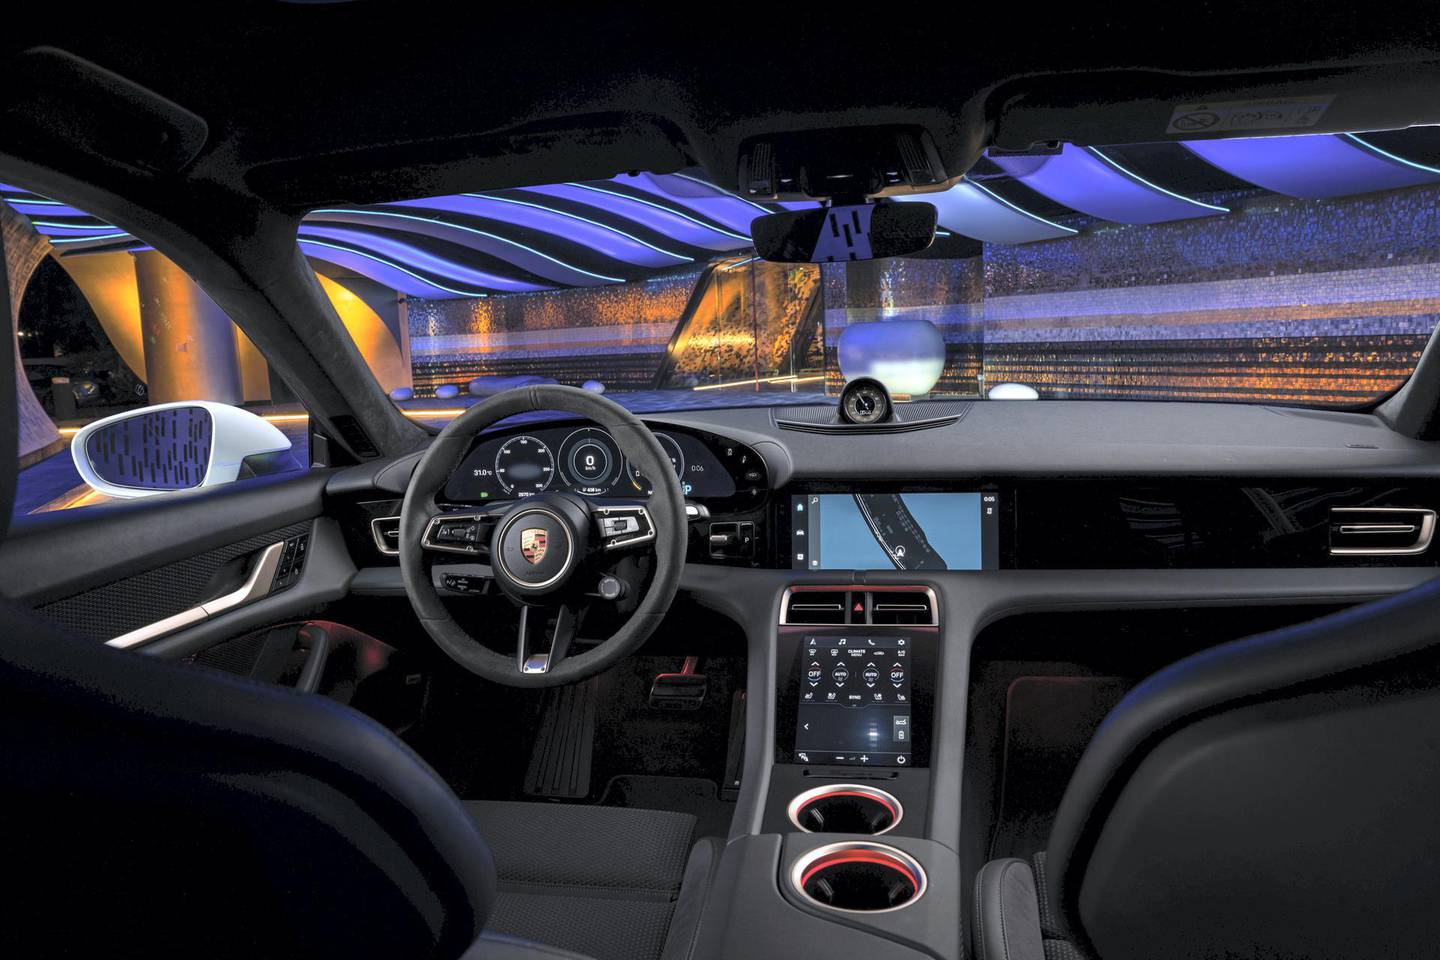 The cockpit features a free-standing curved instrument cluster and central, 10.9-inch infotainment display and an optional passenger display combined to form an integrated glass band. 